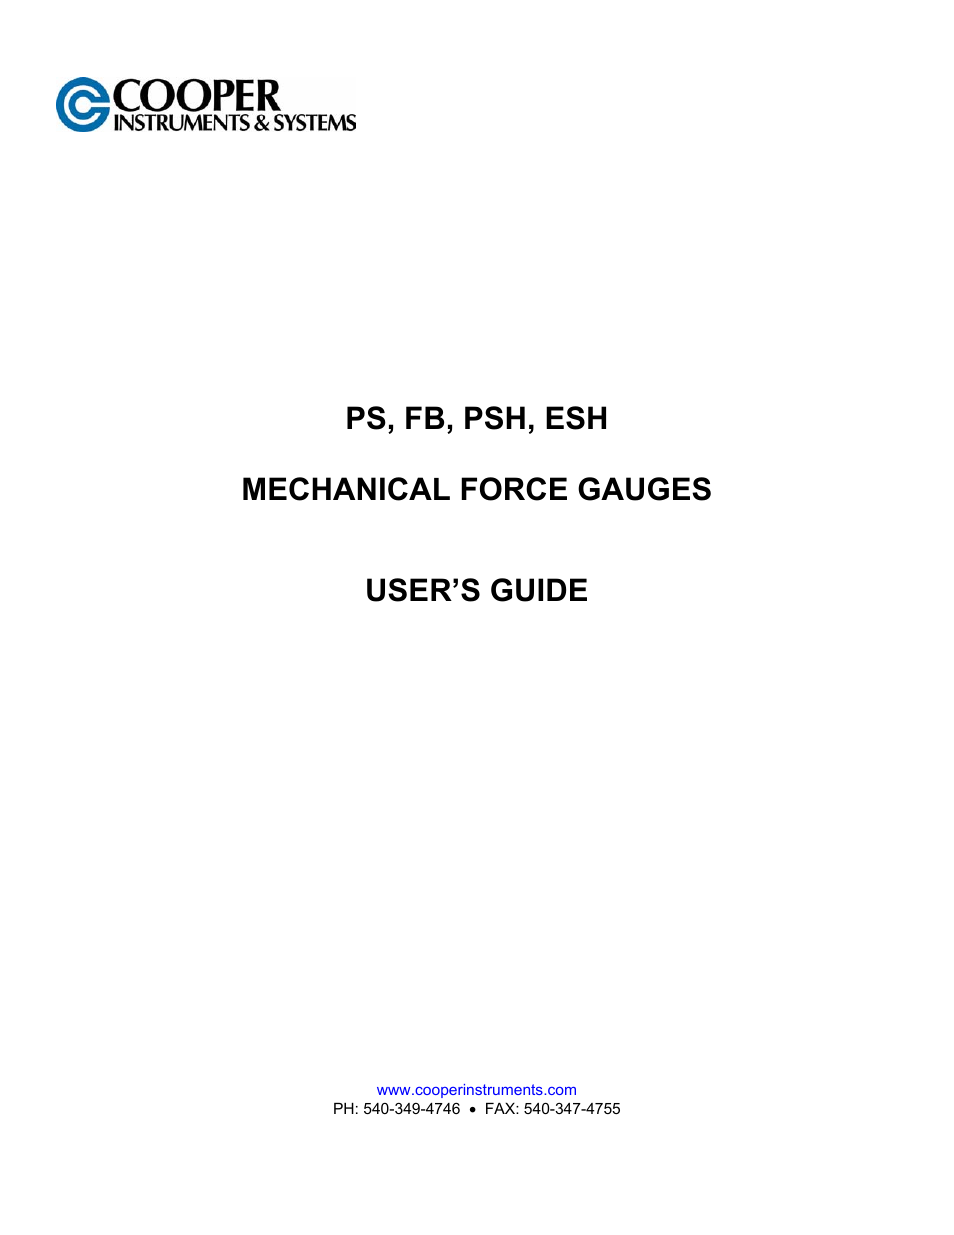 PS Mechanical Force Gages